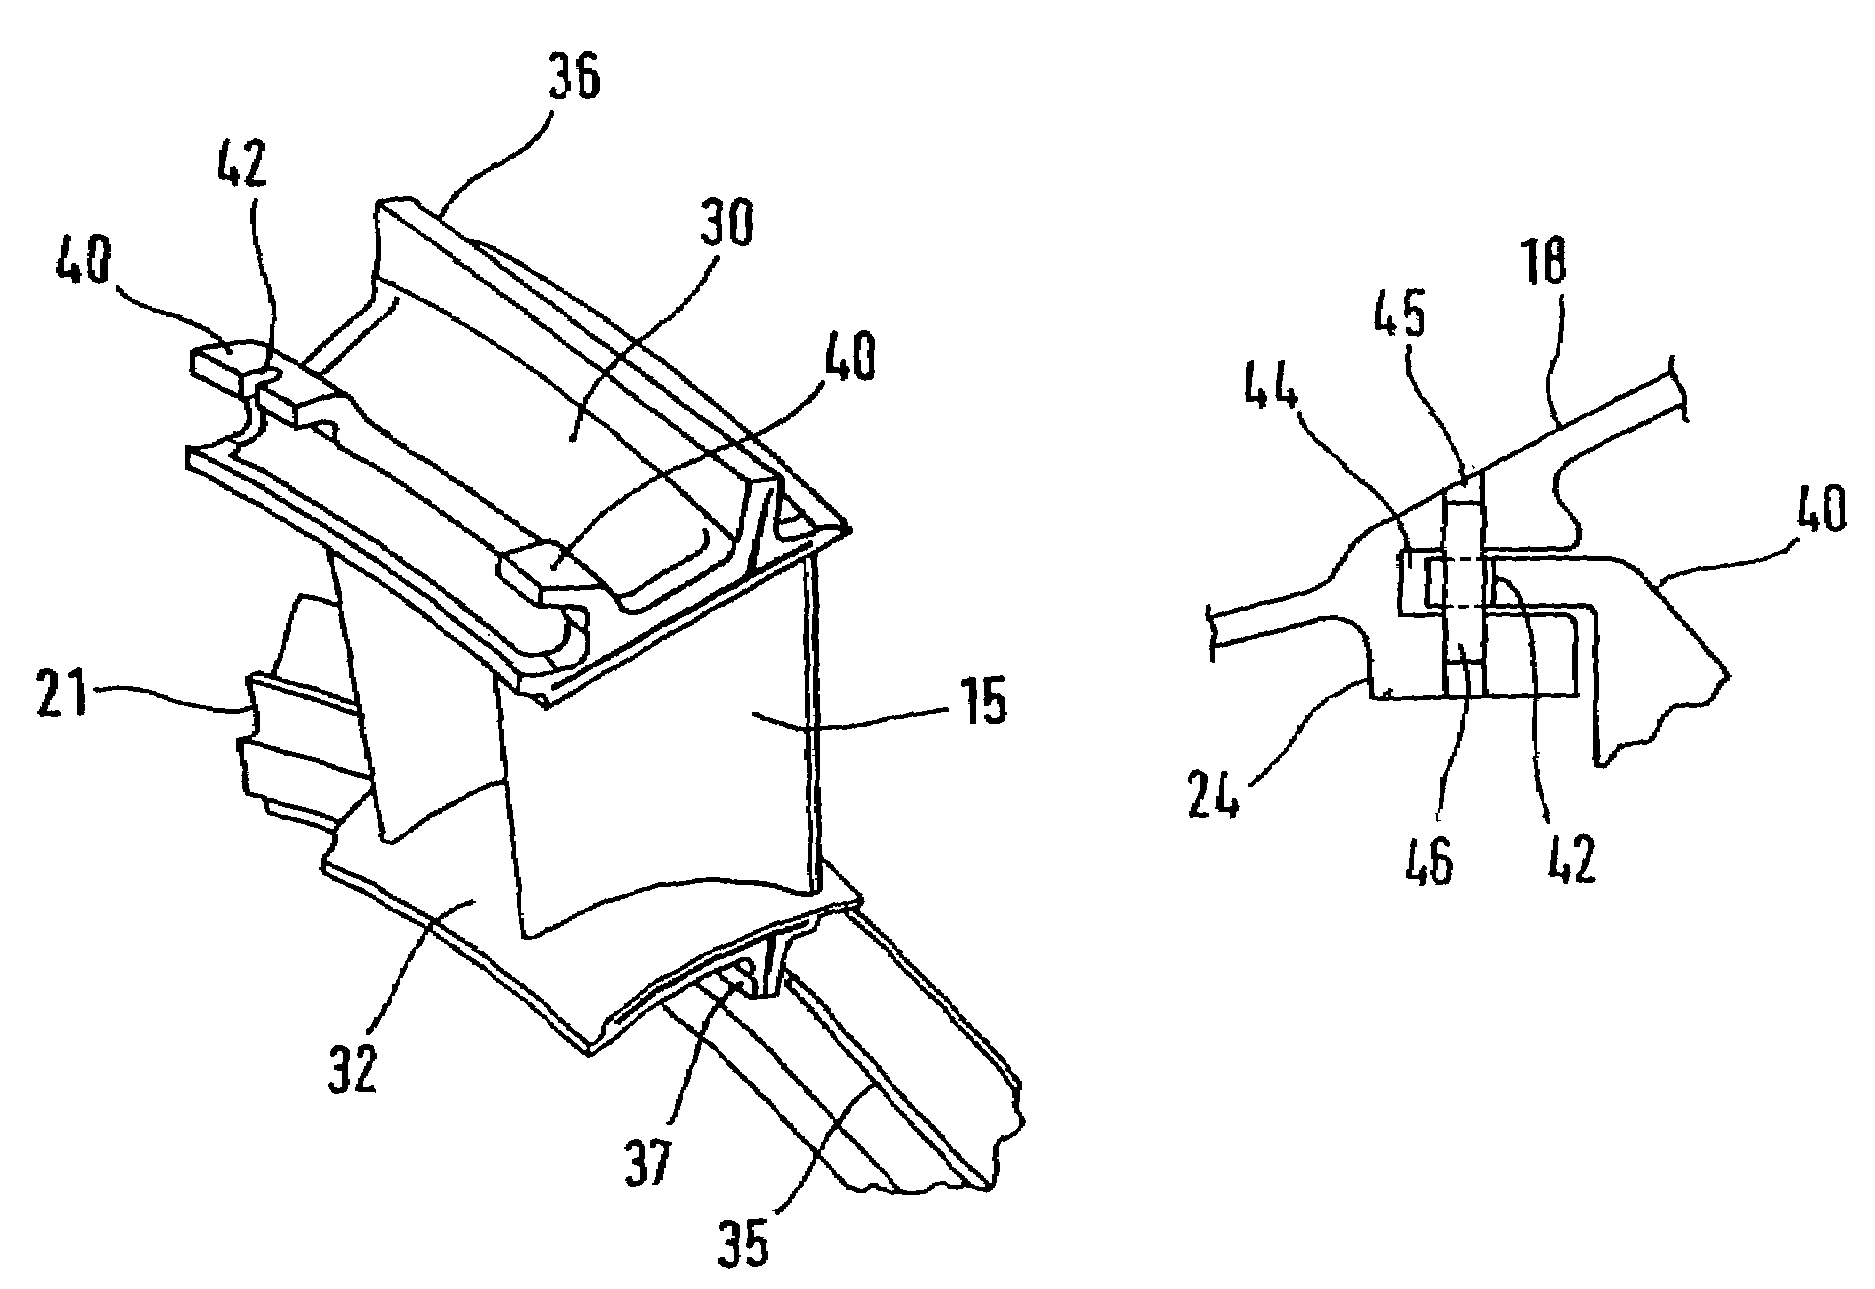 Guide blade fixture in a flow channel of an aircraft gas turbine